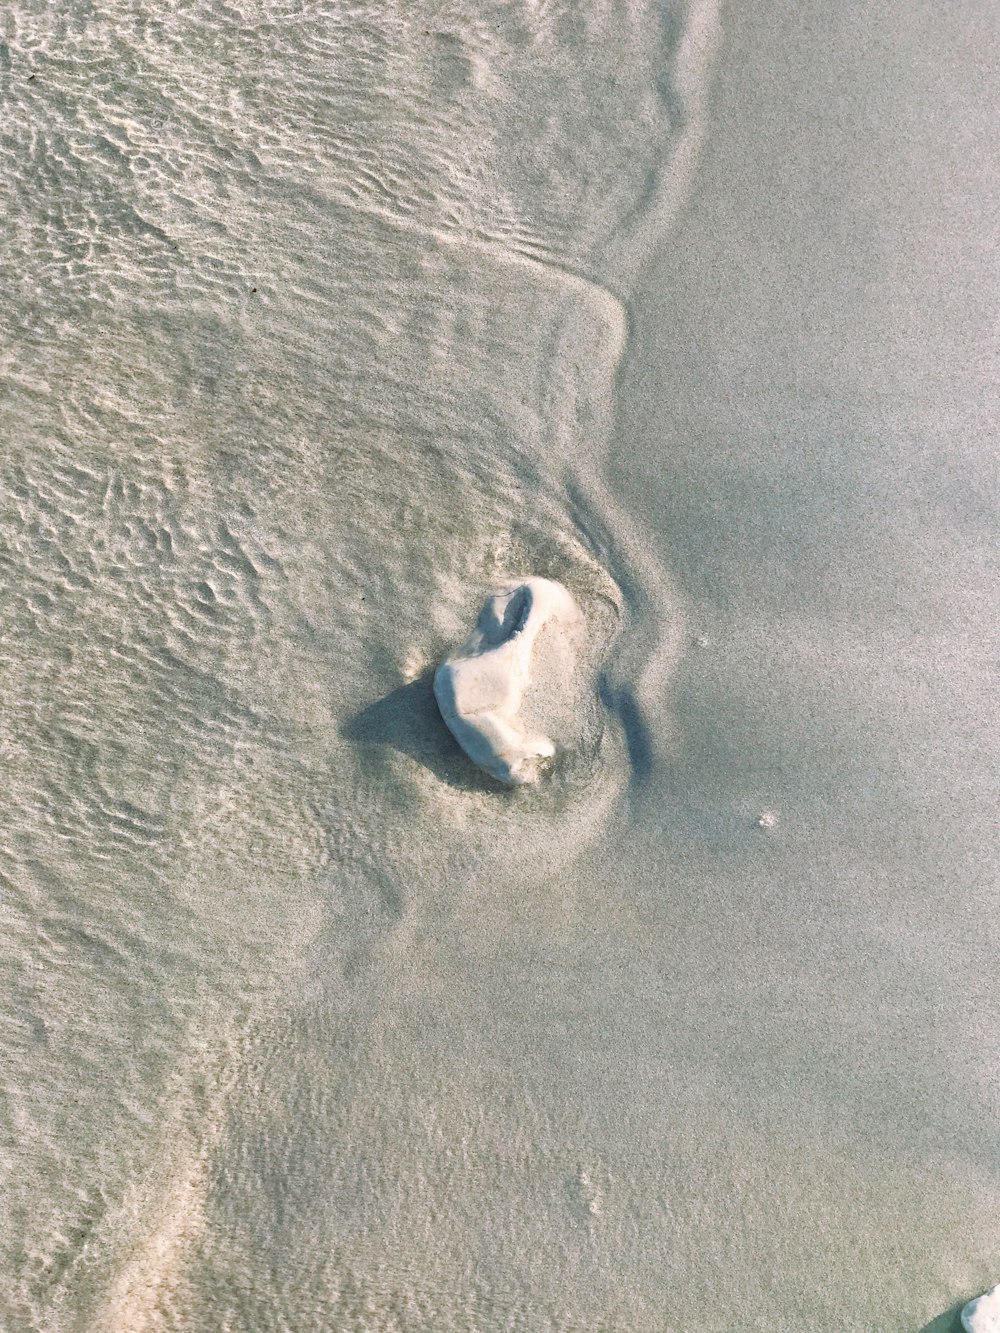 birds eye view of a person in the beach